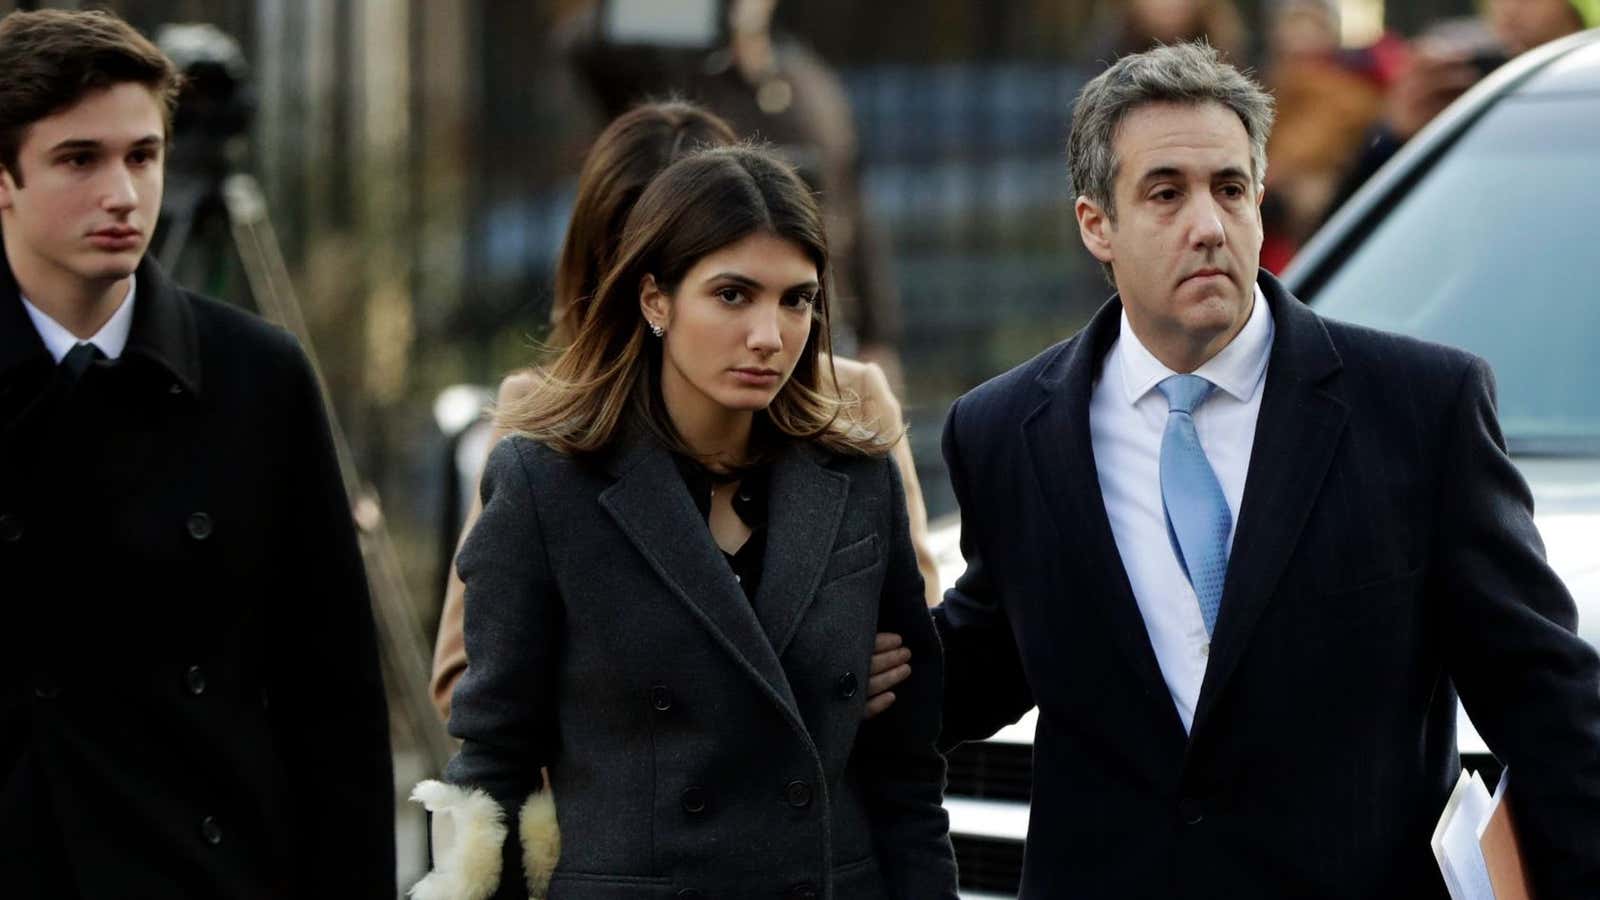 Cohen arrives in federal court last December with his children.